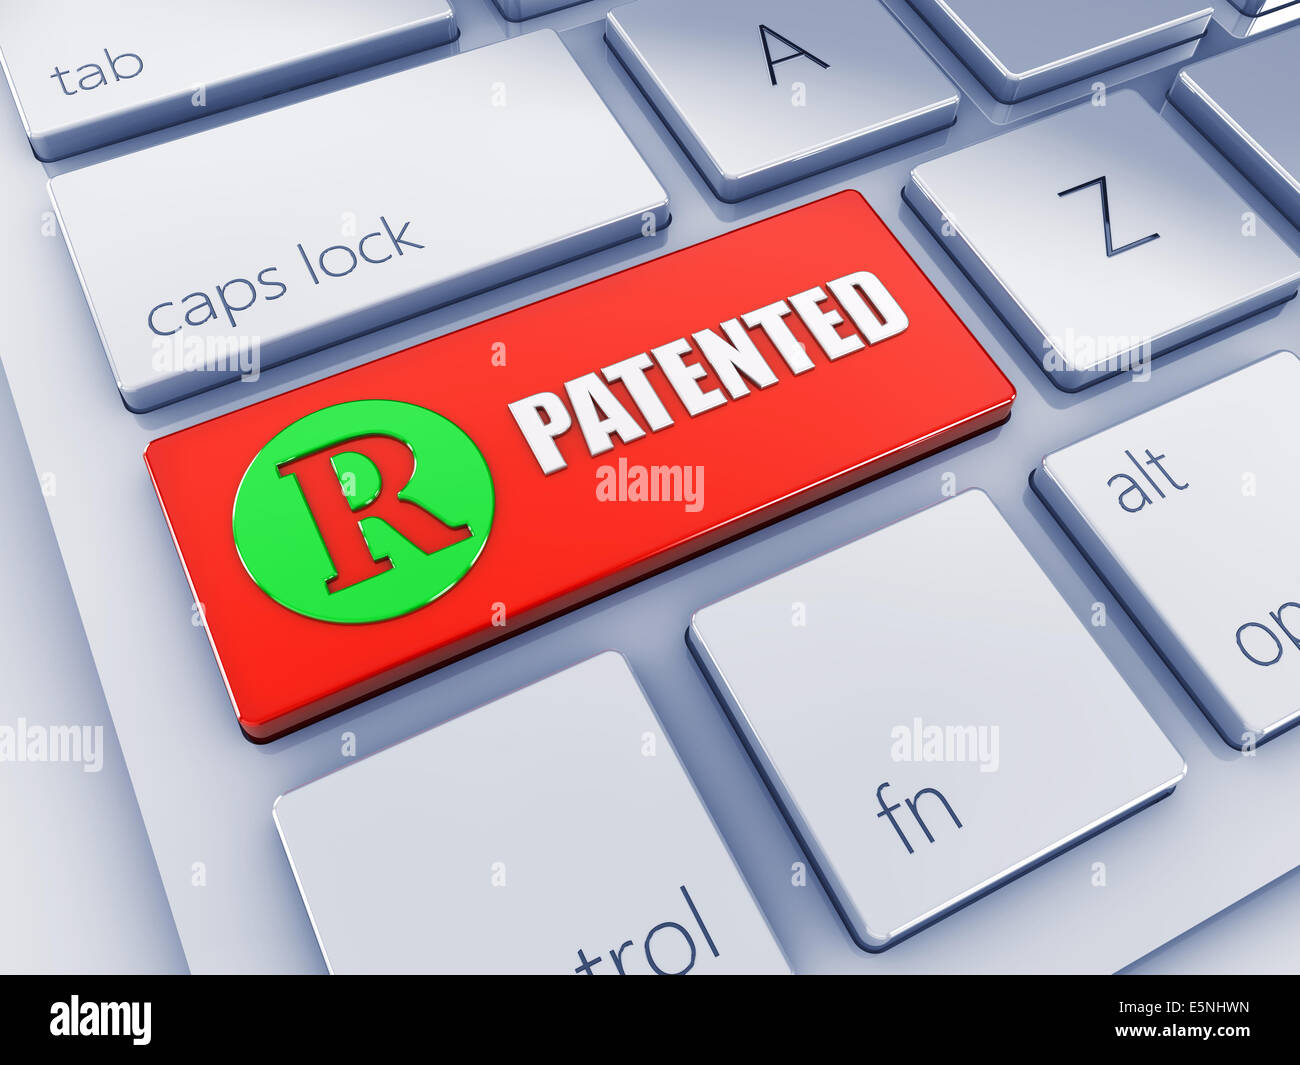 Red Patented key with green icon , 3d computer keyboard Stock Photo